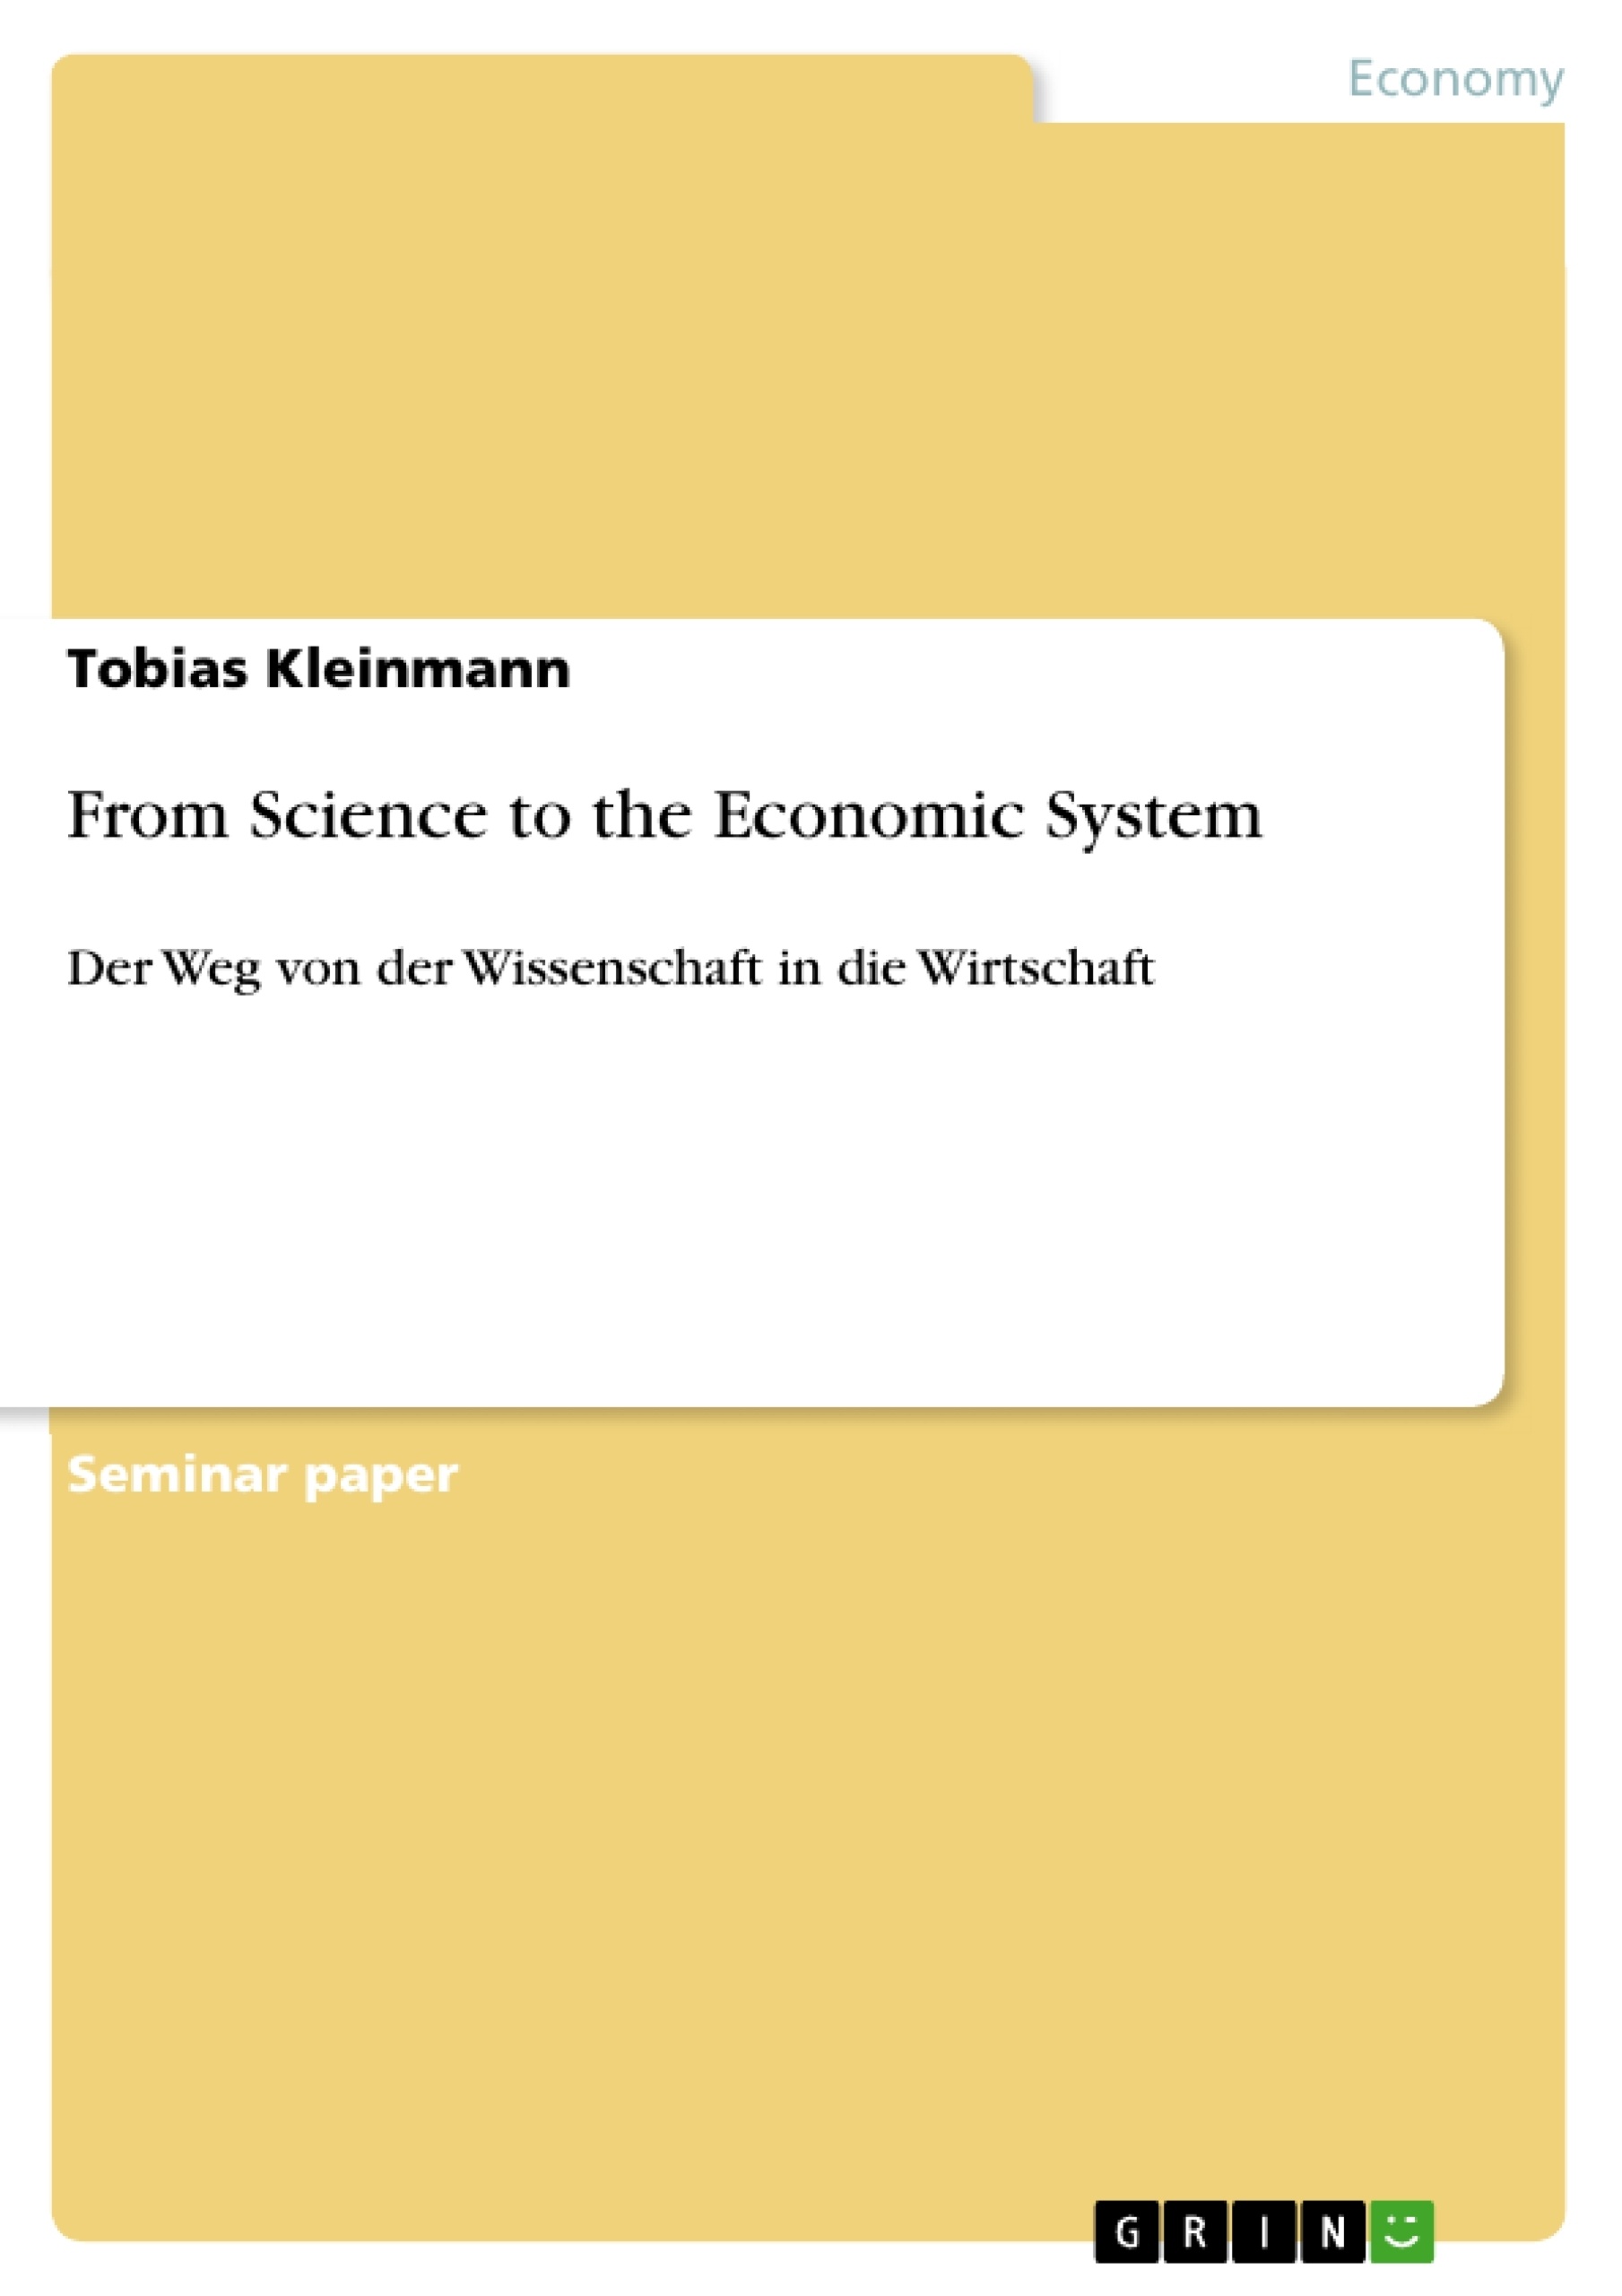 Titel: From Science to the Economic System